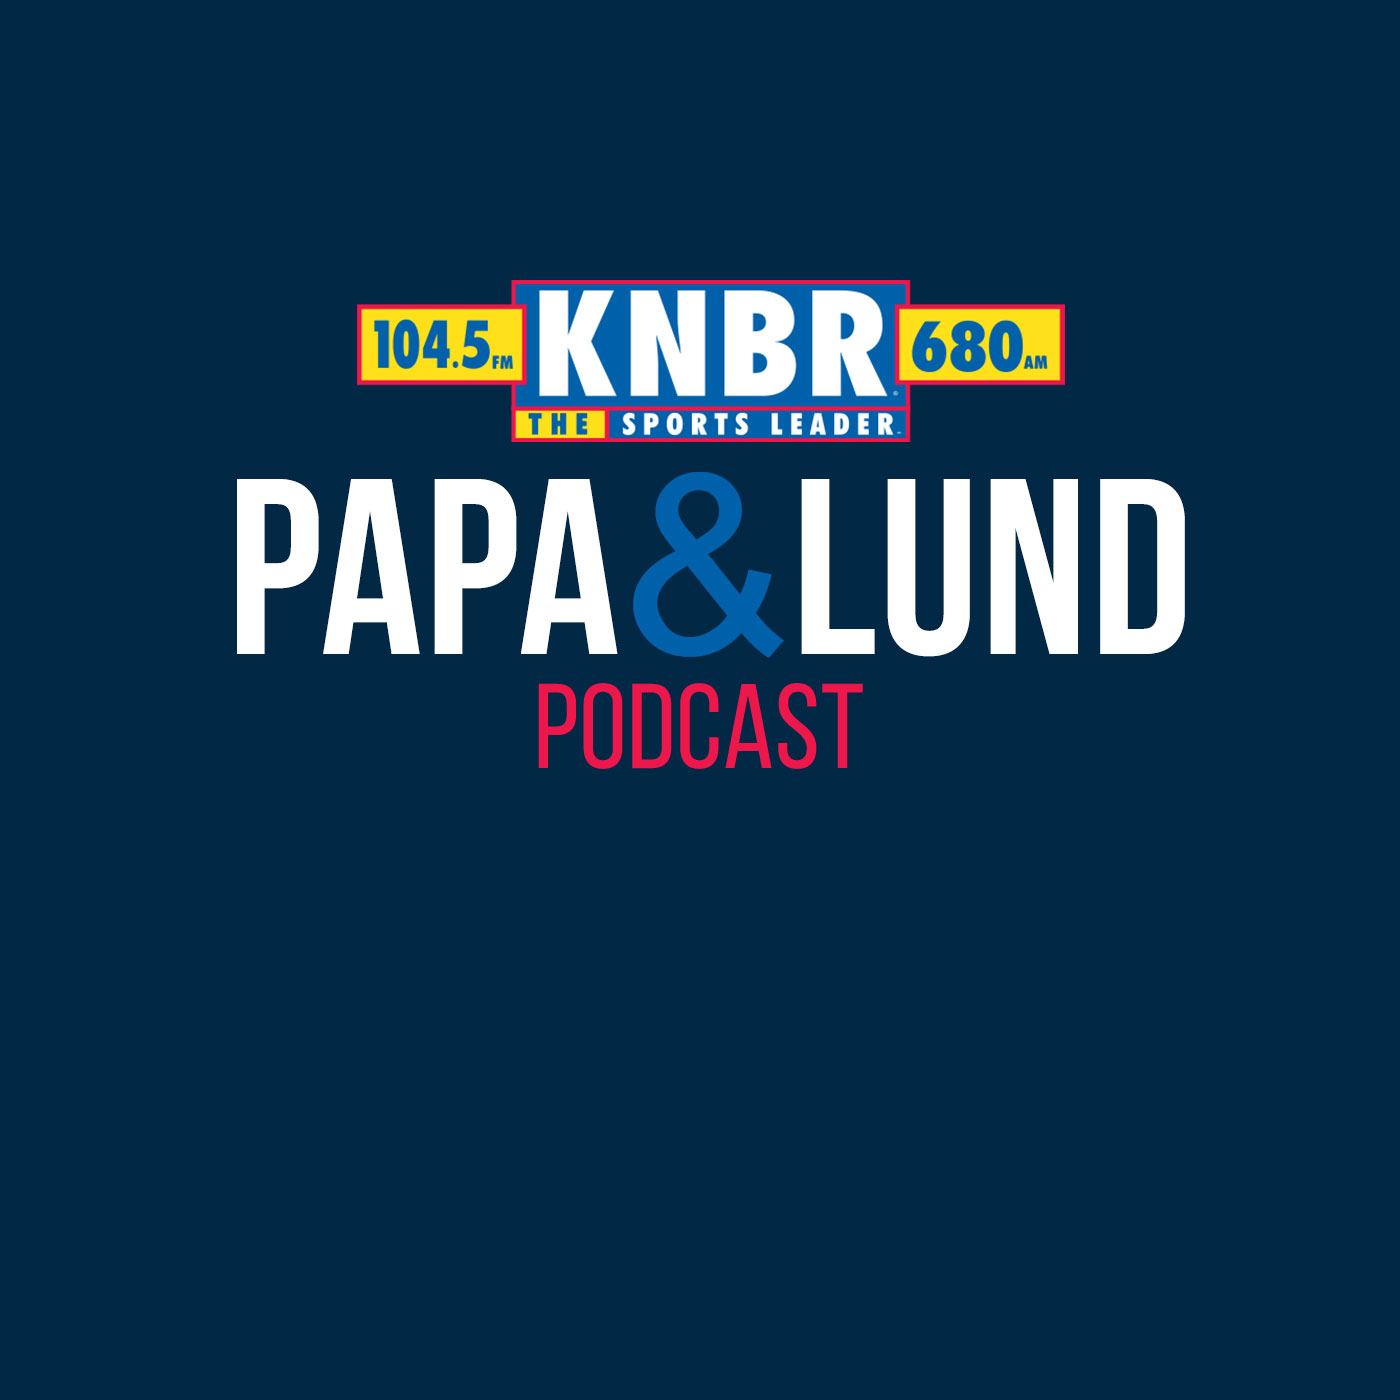 4-12 Papa & Lund discuss how the Giants showed something last night against the Dodgers that hasn't been there since last season, as well as propose a new way to give a decision for pitchers